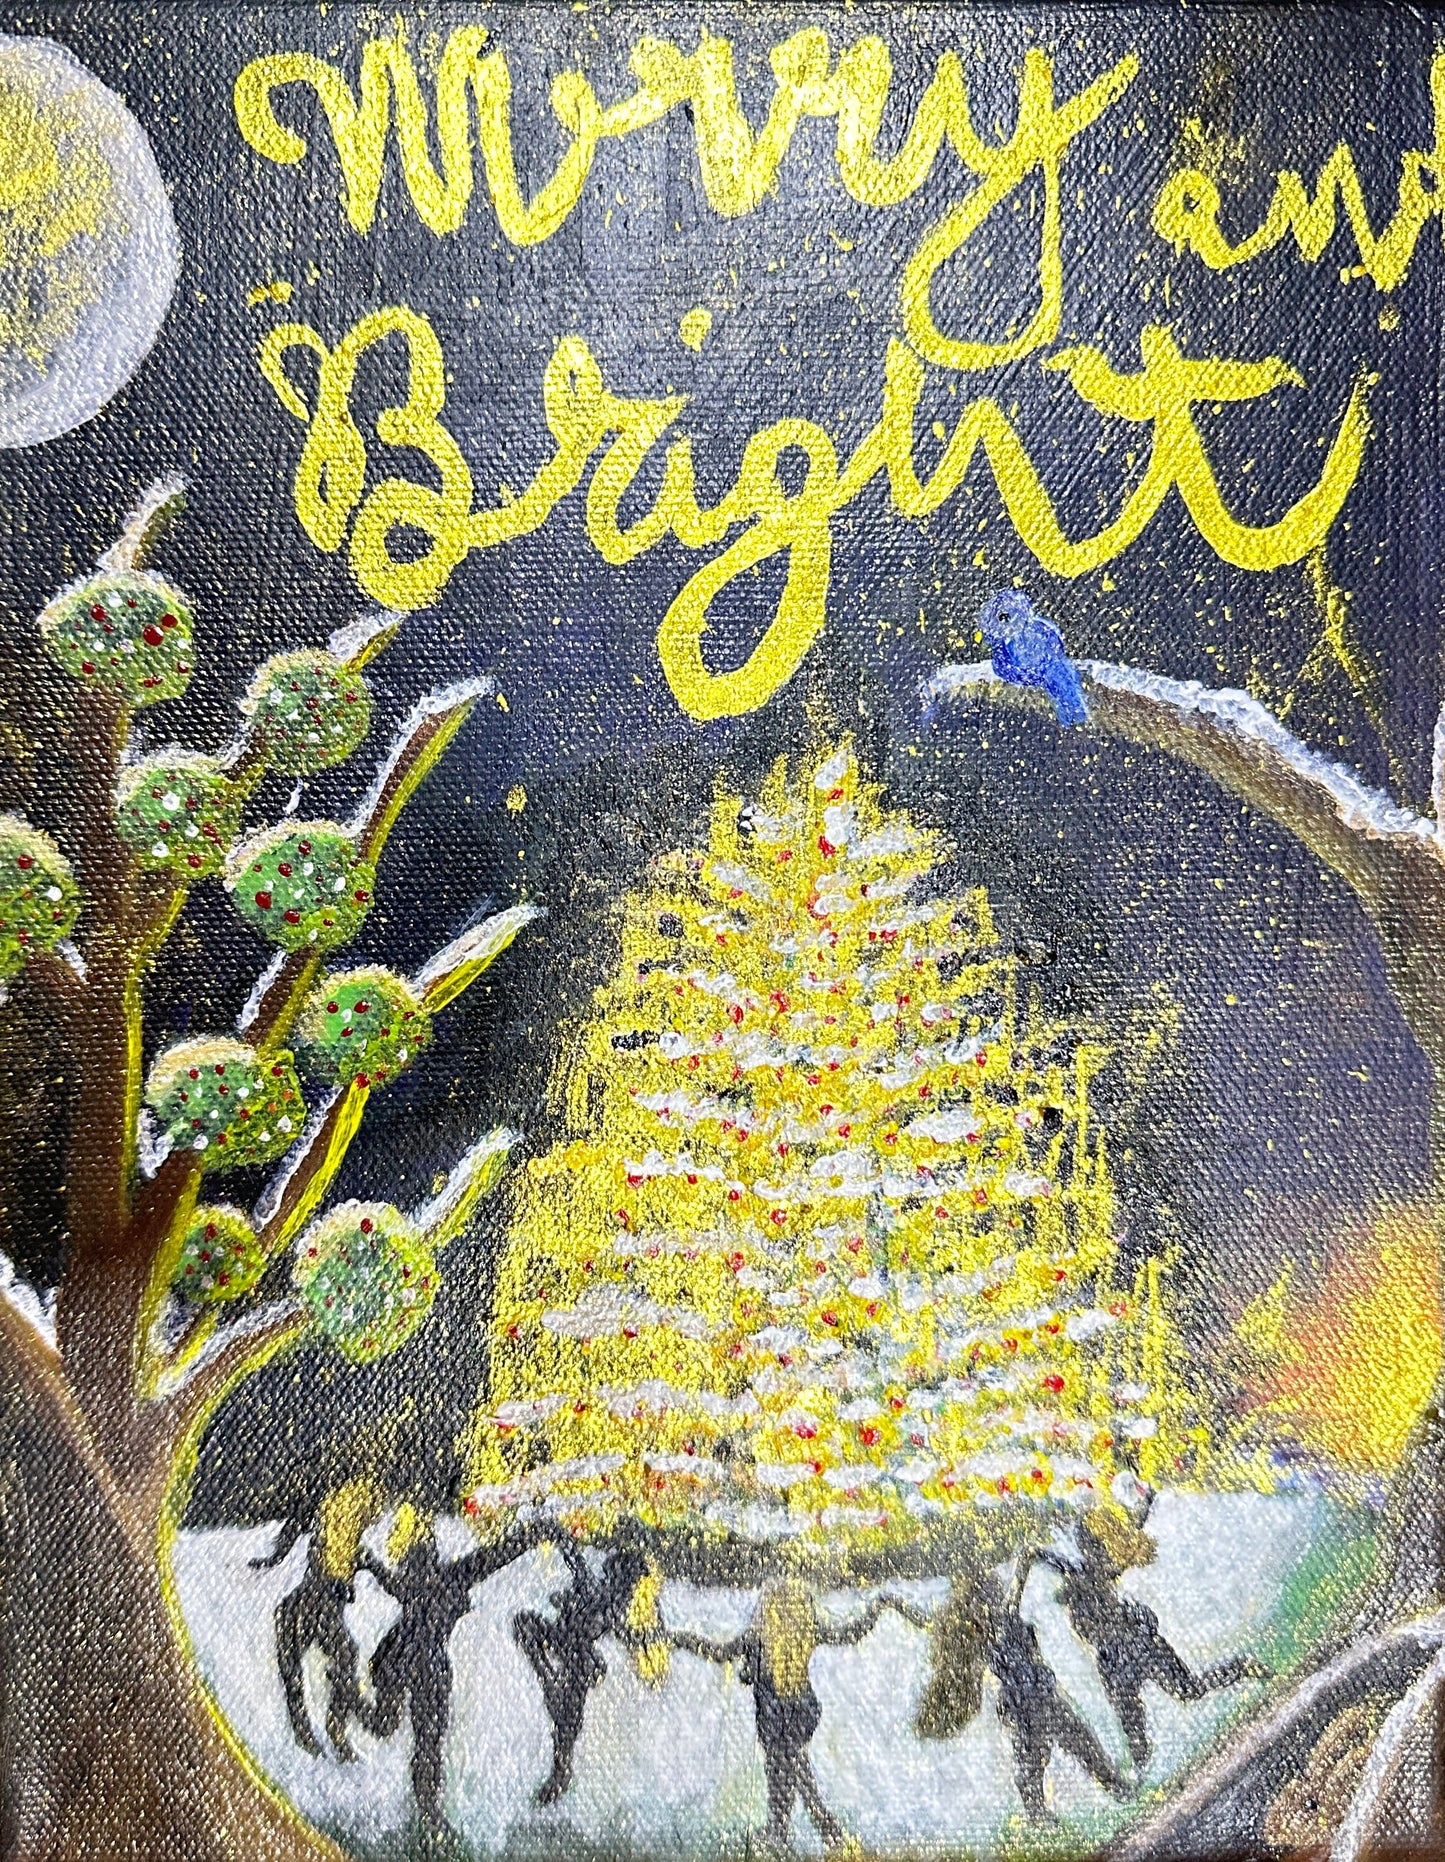 (Art Print) Merry  and bright